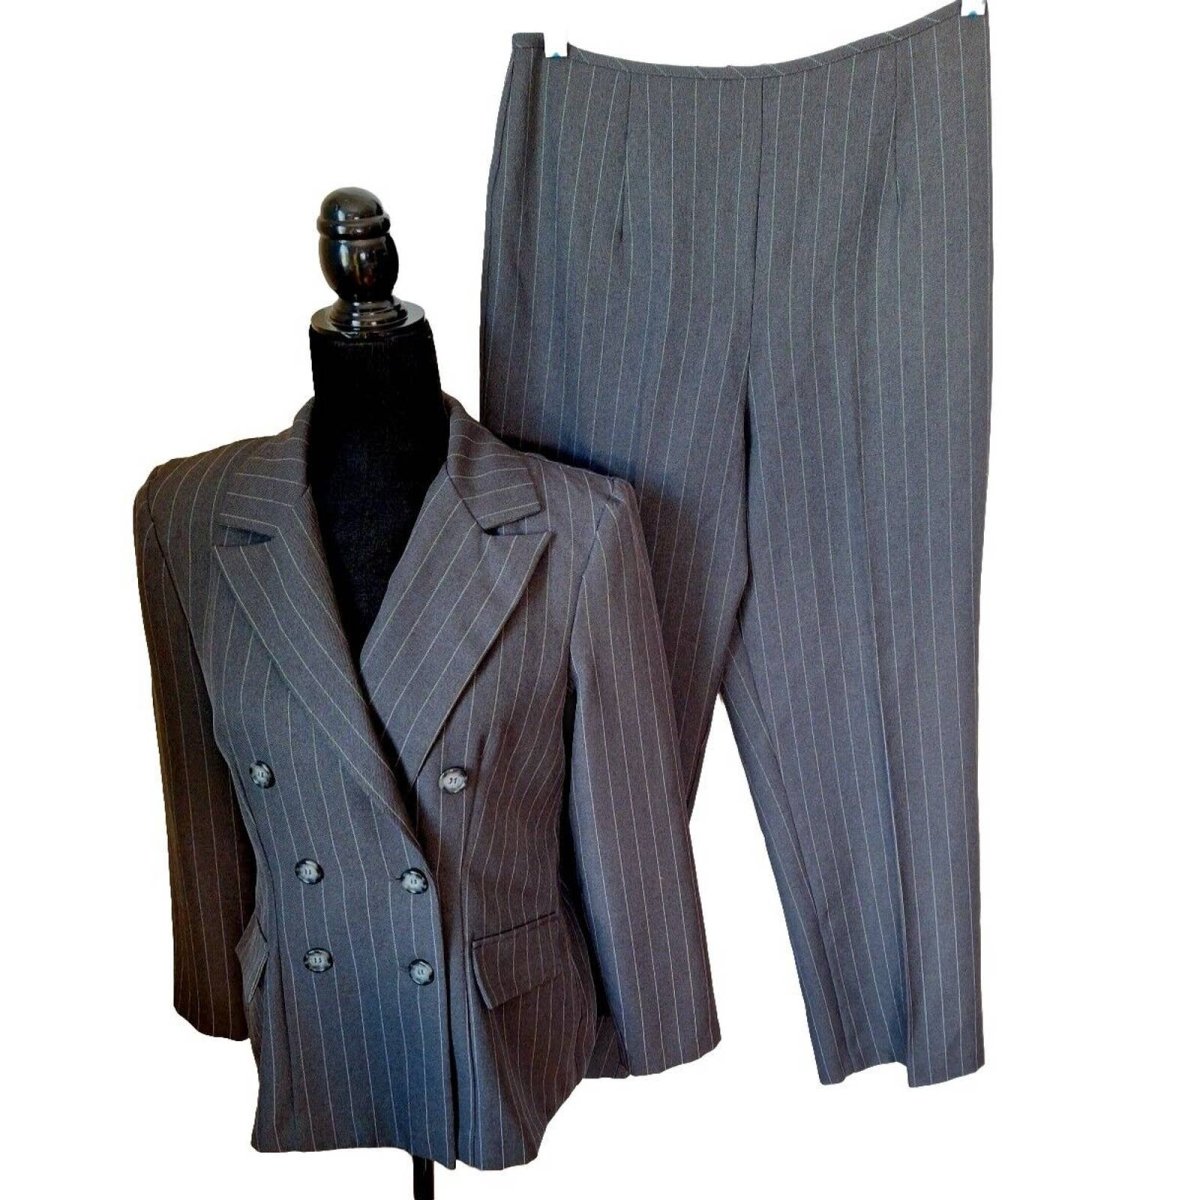 Vintage 90s Gray Pinstripe Double Breasted Pant Suit Women Size S/M - themallvintage The Mall Vintage